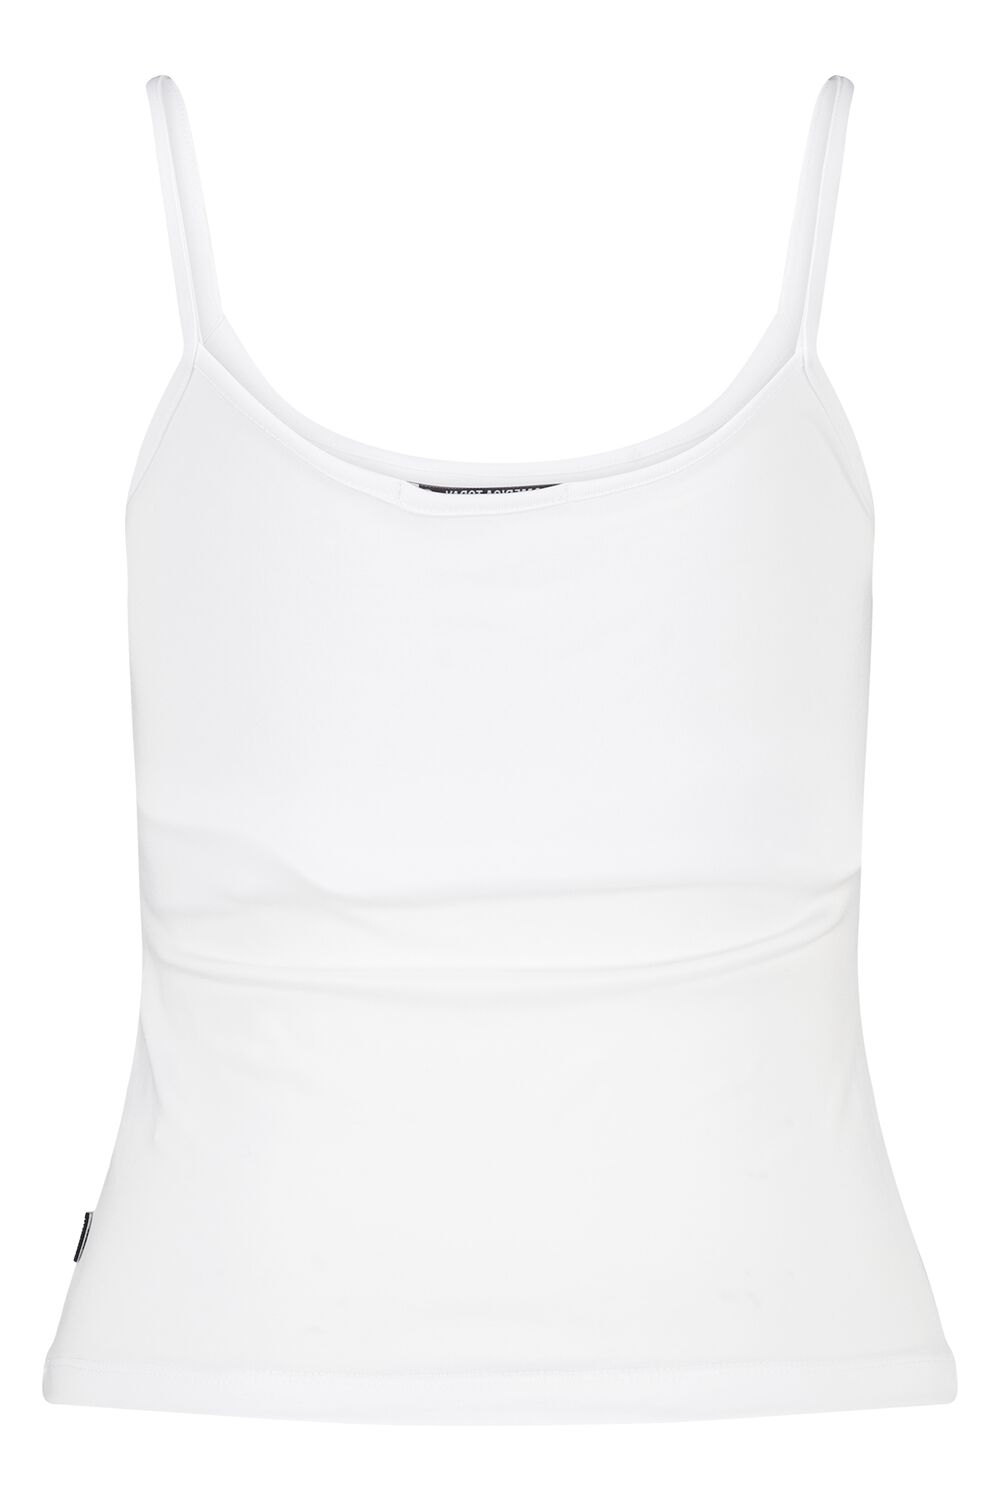 America Today Dames Singlet Ginger Wit